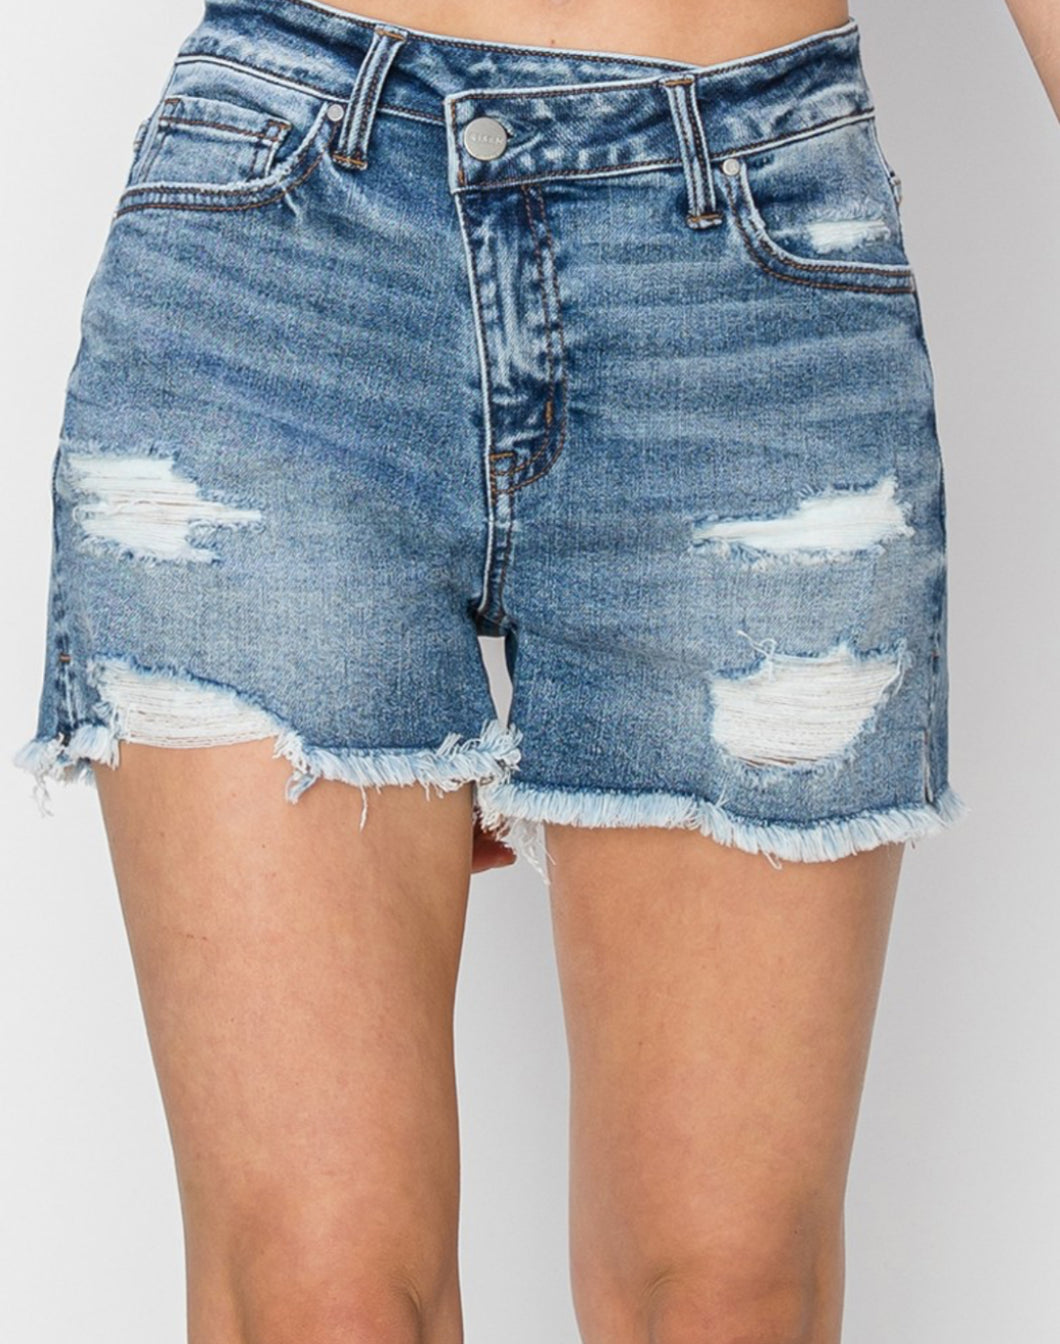 Criss cross button distressed shorts